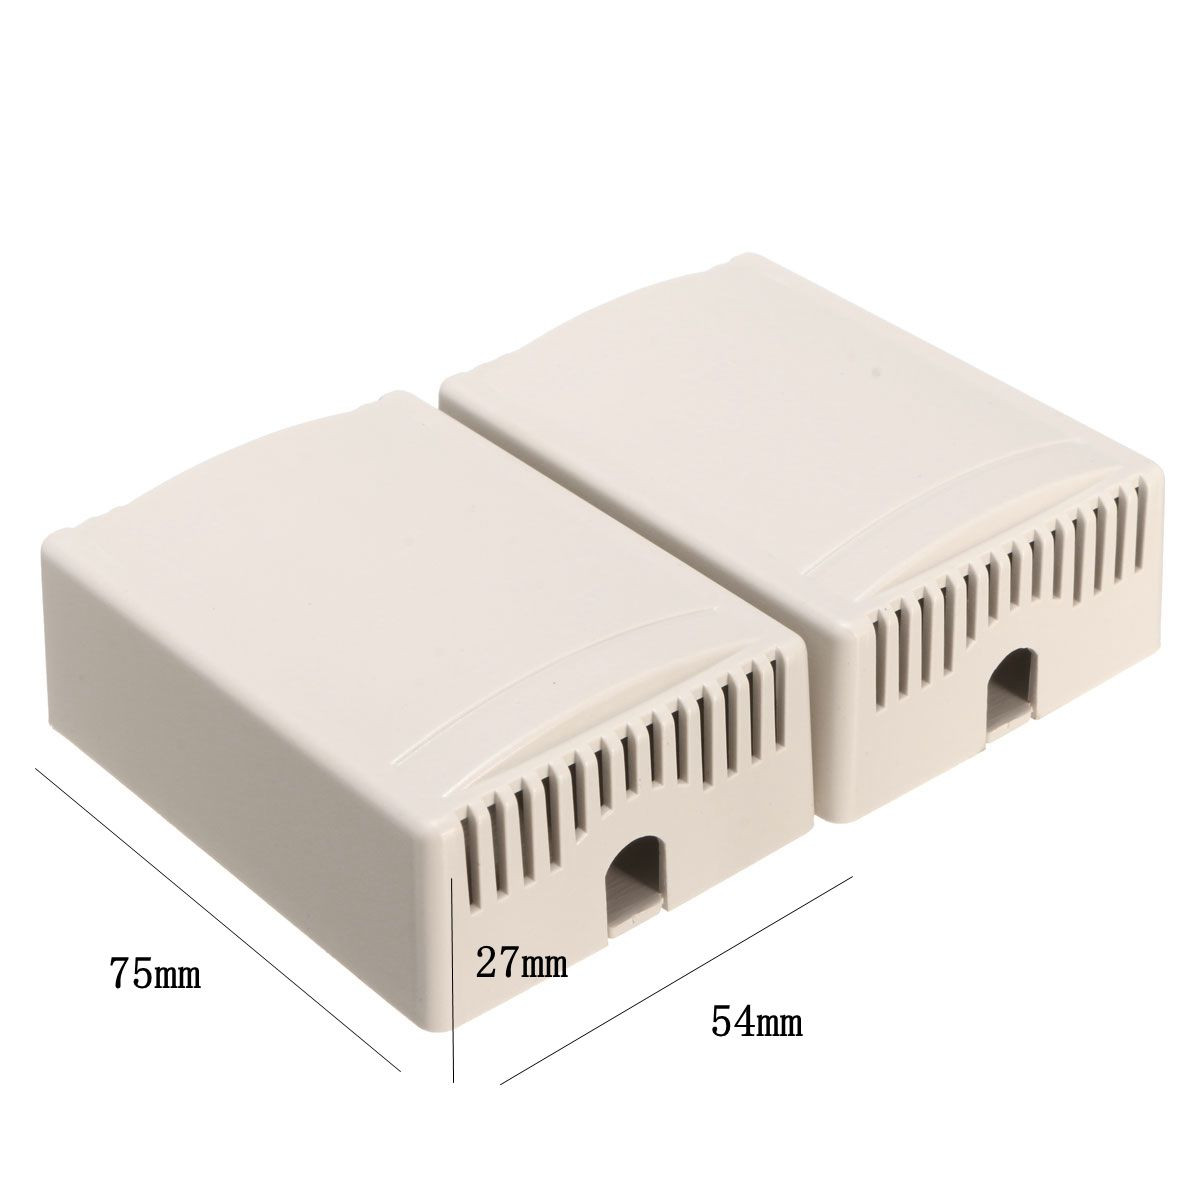 1-Pair-75-x-54-x-27mm-DIY-Plastic-Project-Housing-Electronic-Junction-Case-Power-Supply-Box-1063302-3